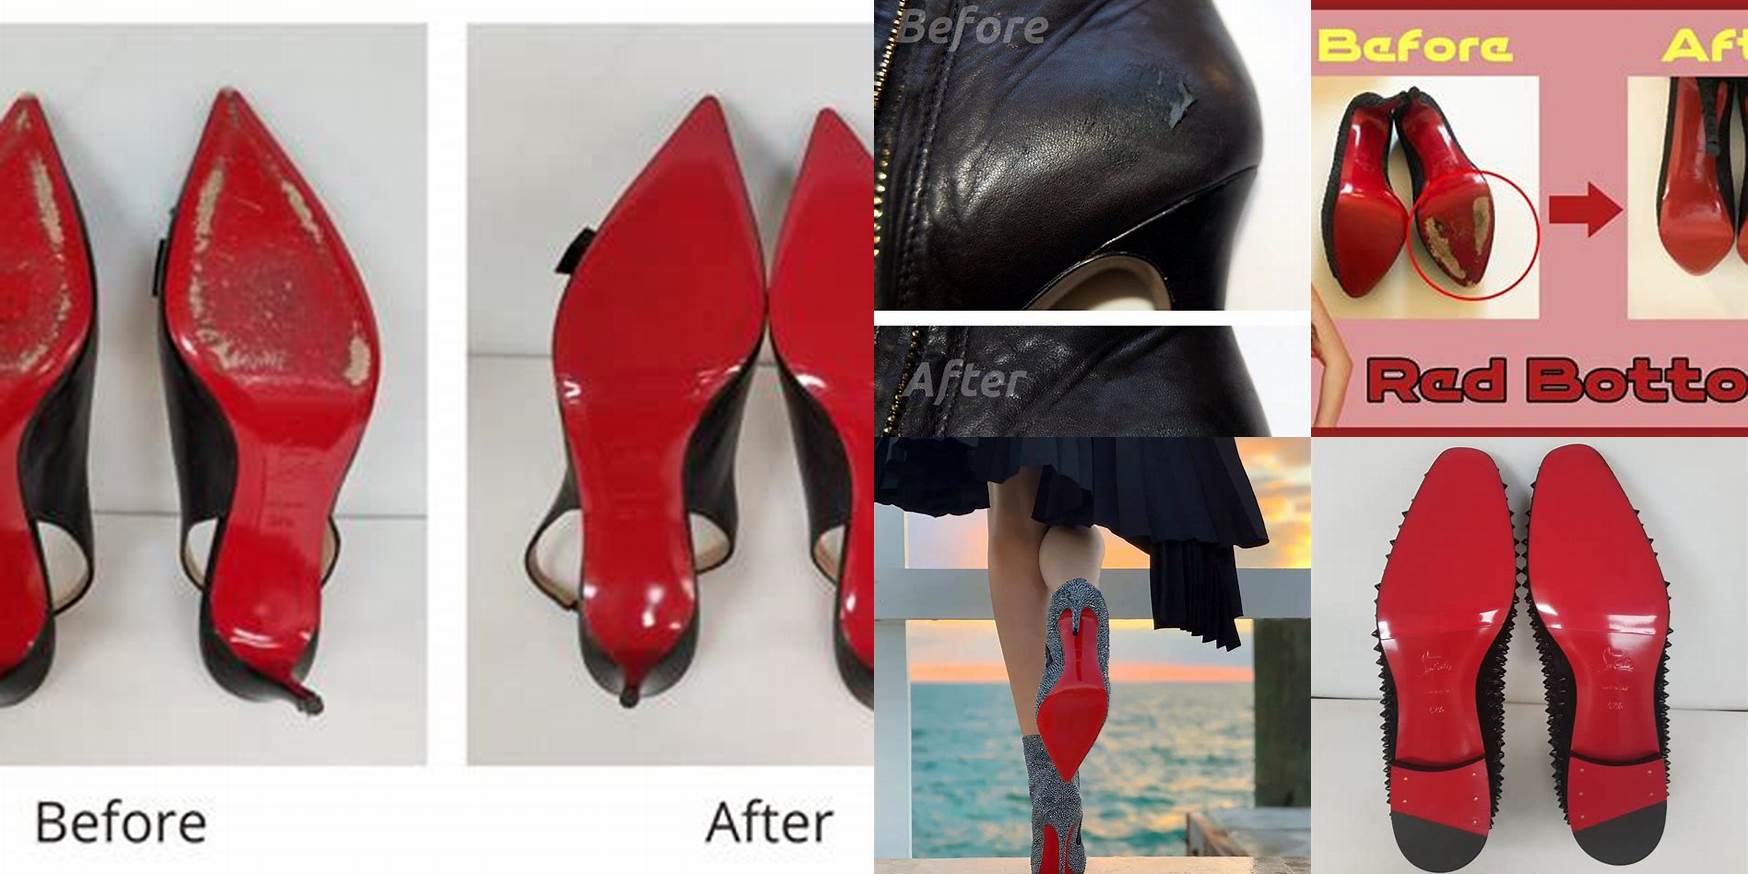 How To Repair Red Bottom Shoes